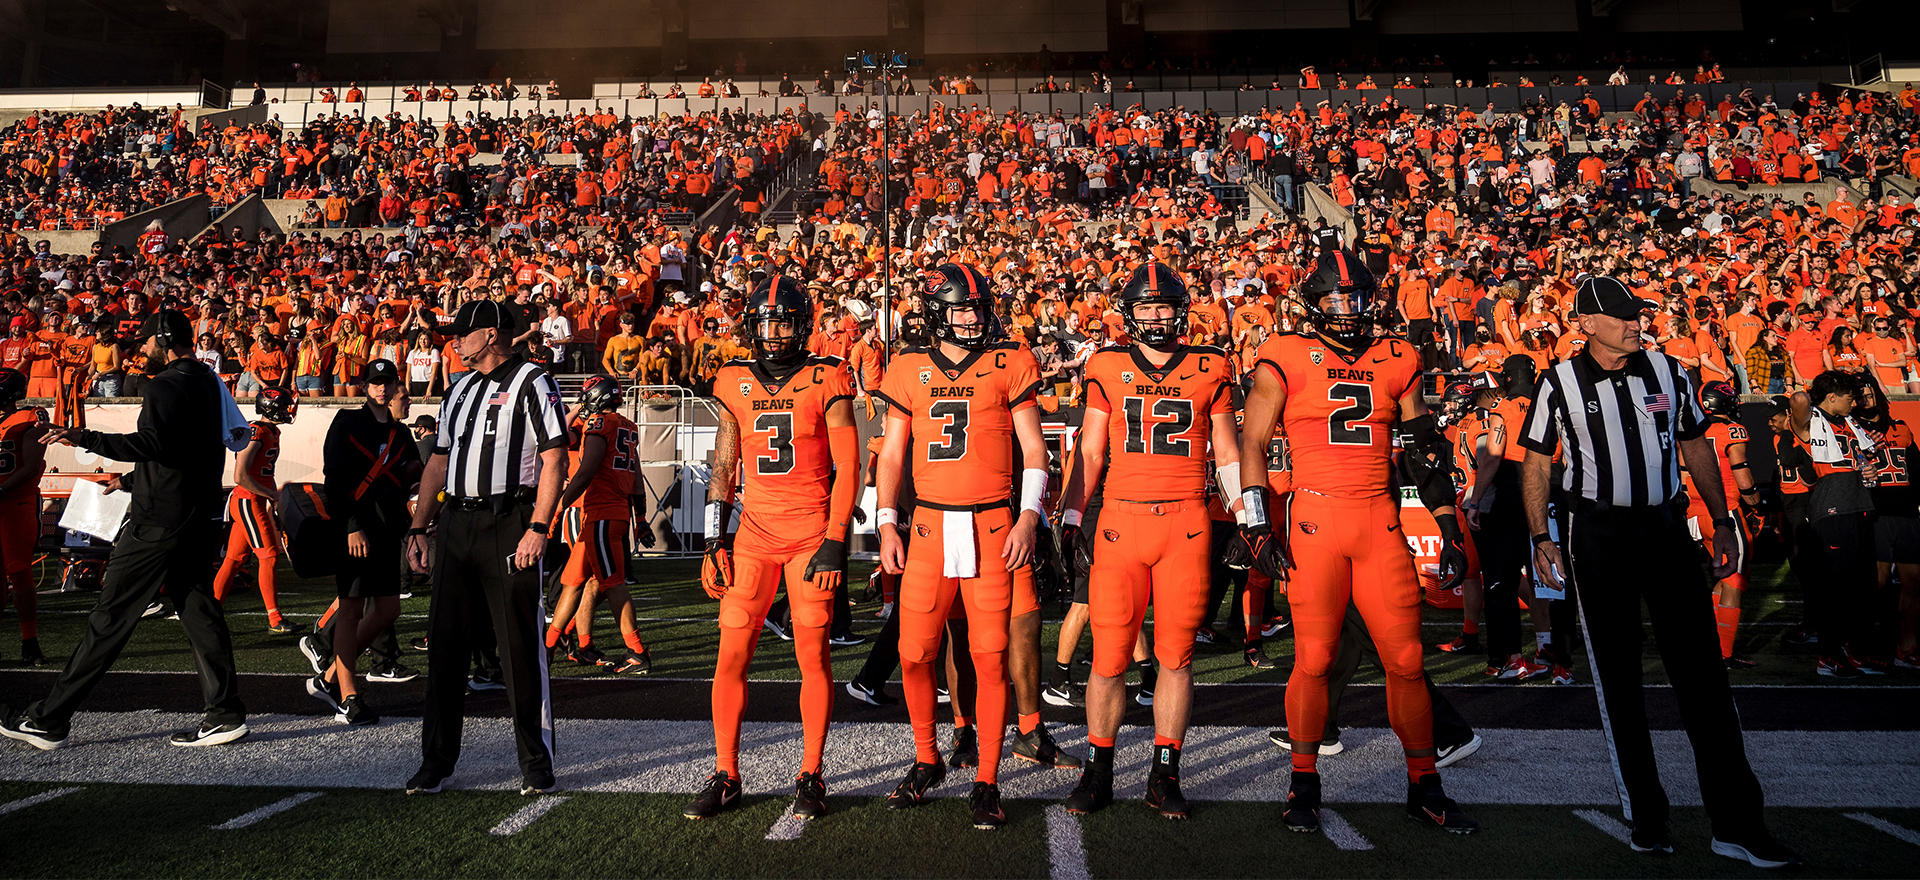 OSU Beaver Football players lined up in a row on the sideline